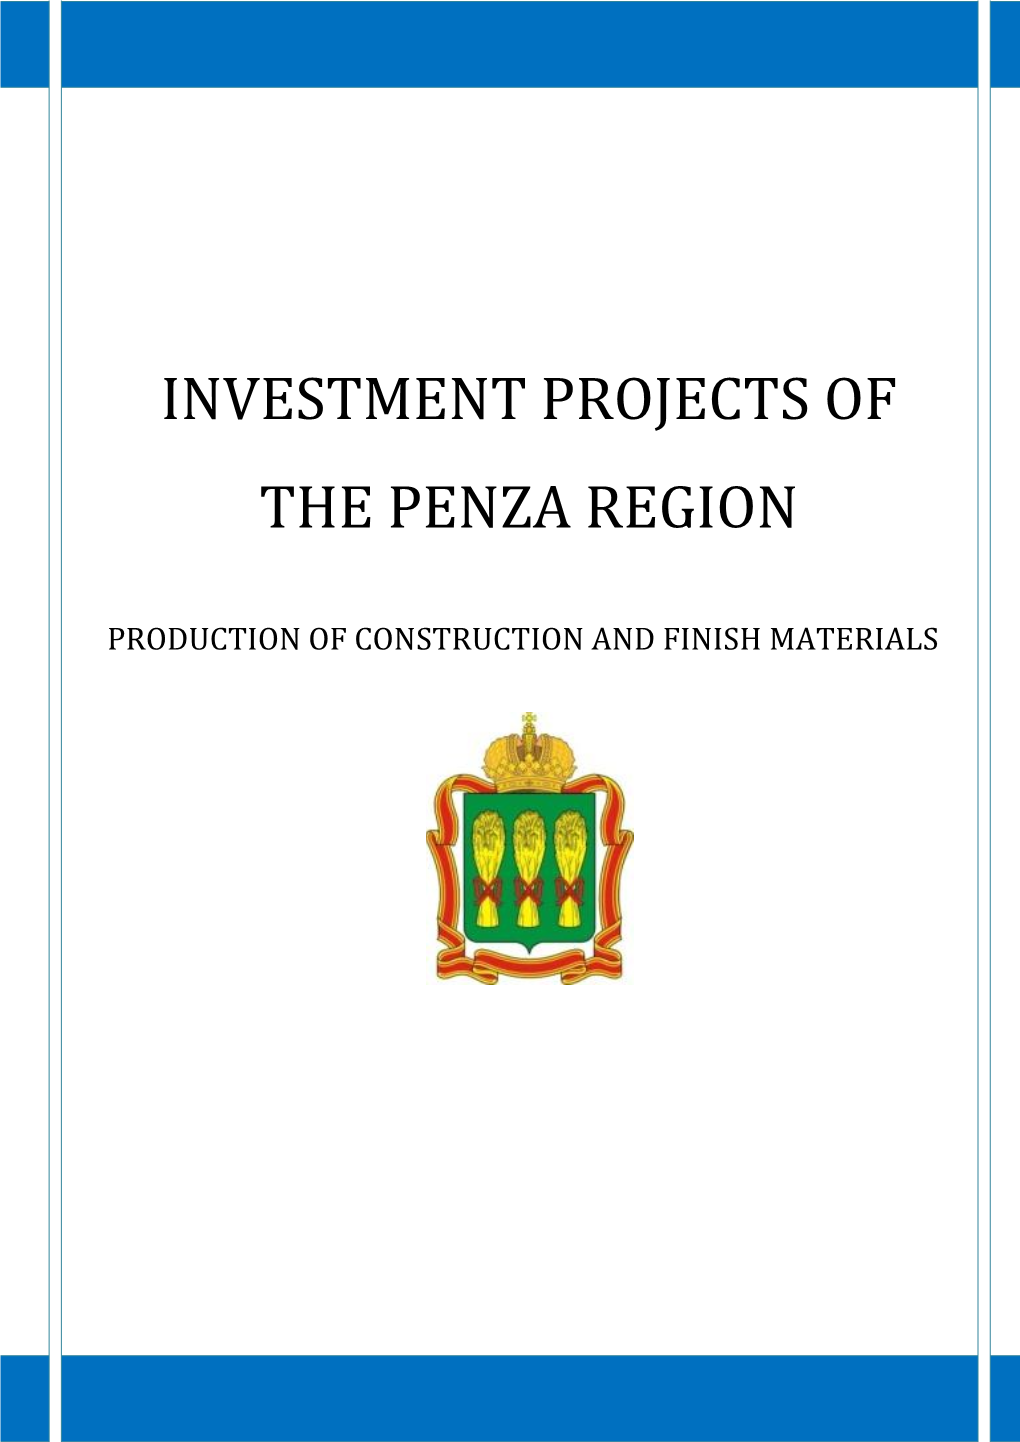 Investment Projects of the Penza Region in Production